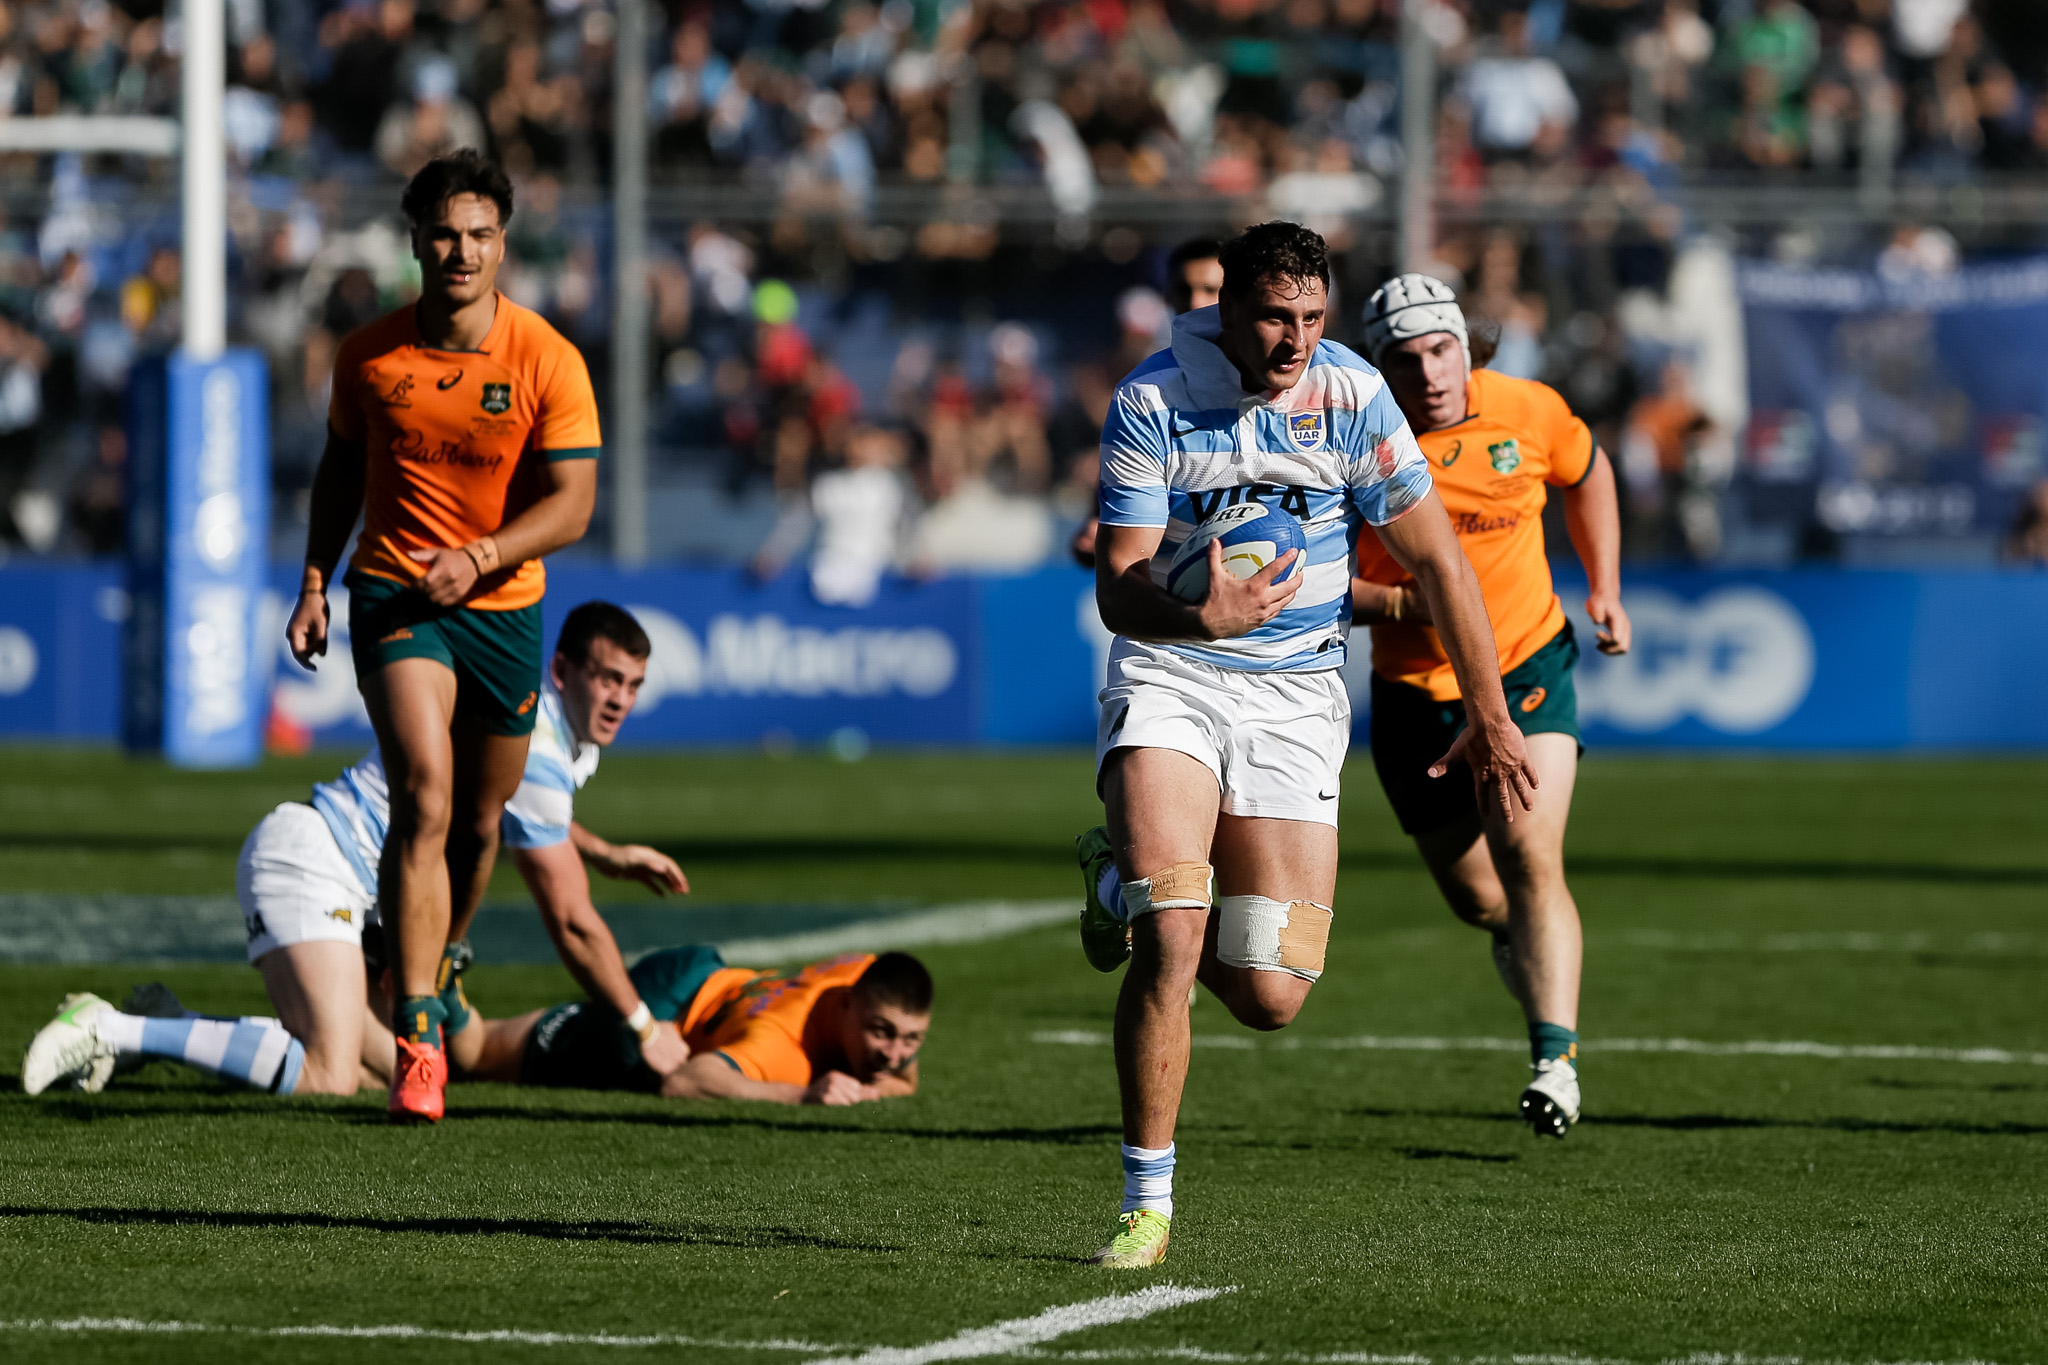 The Pumas had a historic day against Australia and beat them by a difference of 31 points